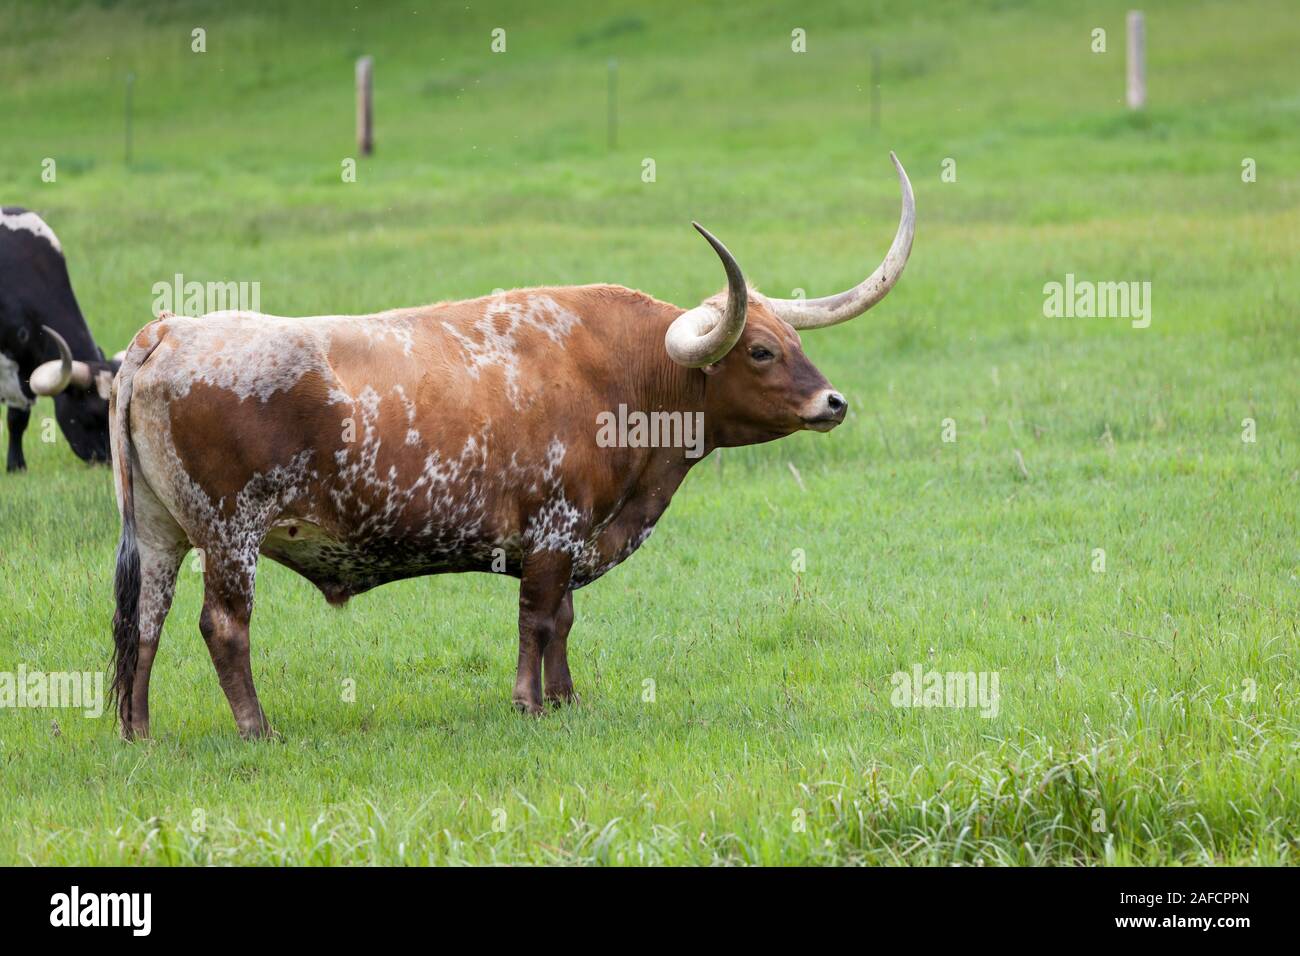 A brown and white Texas Longhorn cow looking ahead while standing in a green grass field on a farm. Stock Photo